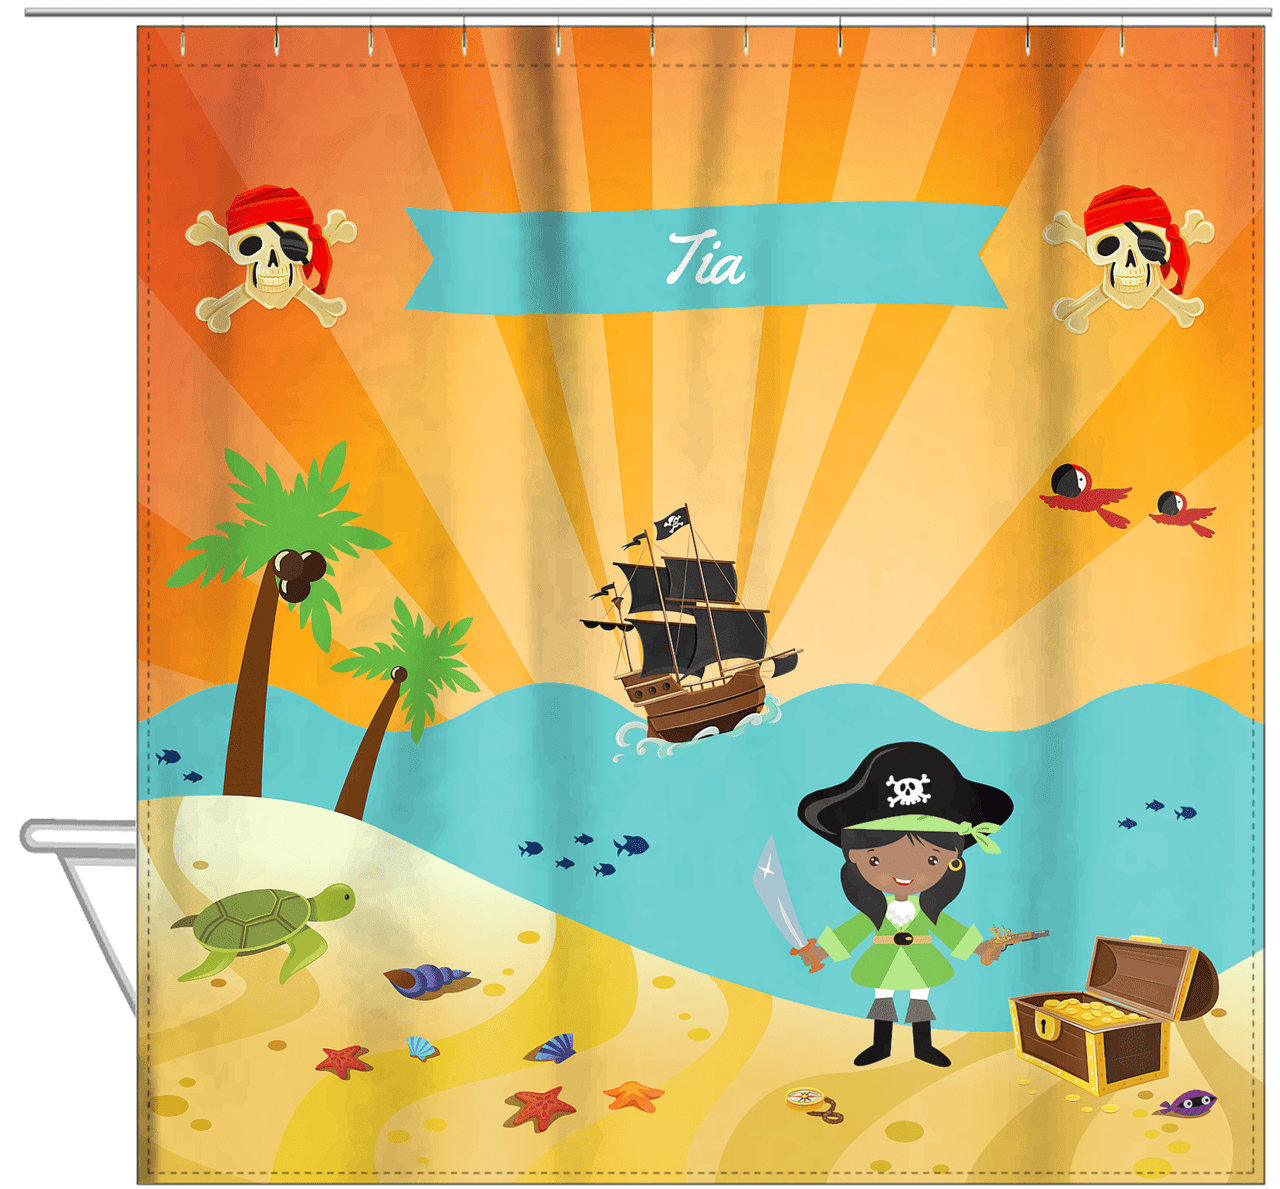 Personalized Pirate Shower Curtain XII - Orange Background - Black Girl with Sword - Hanging View